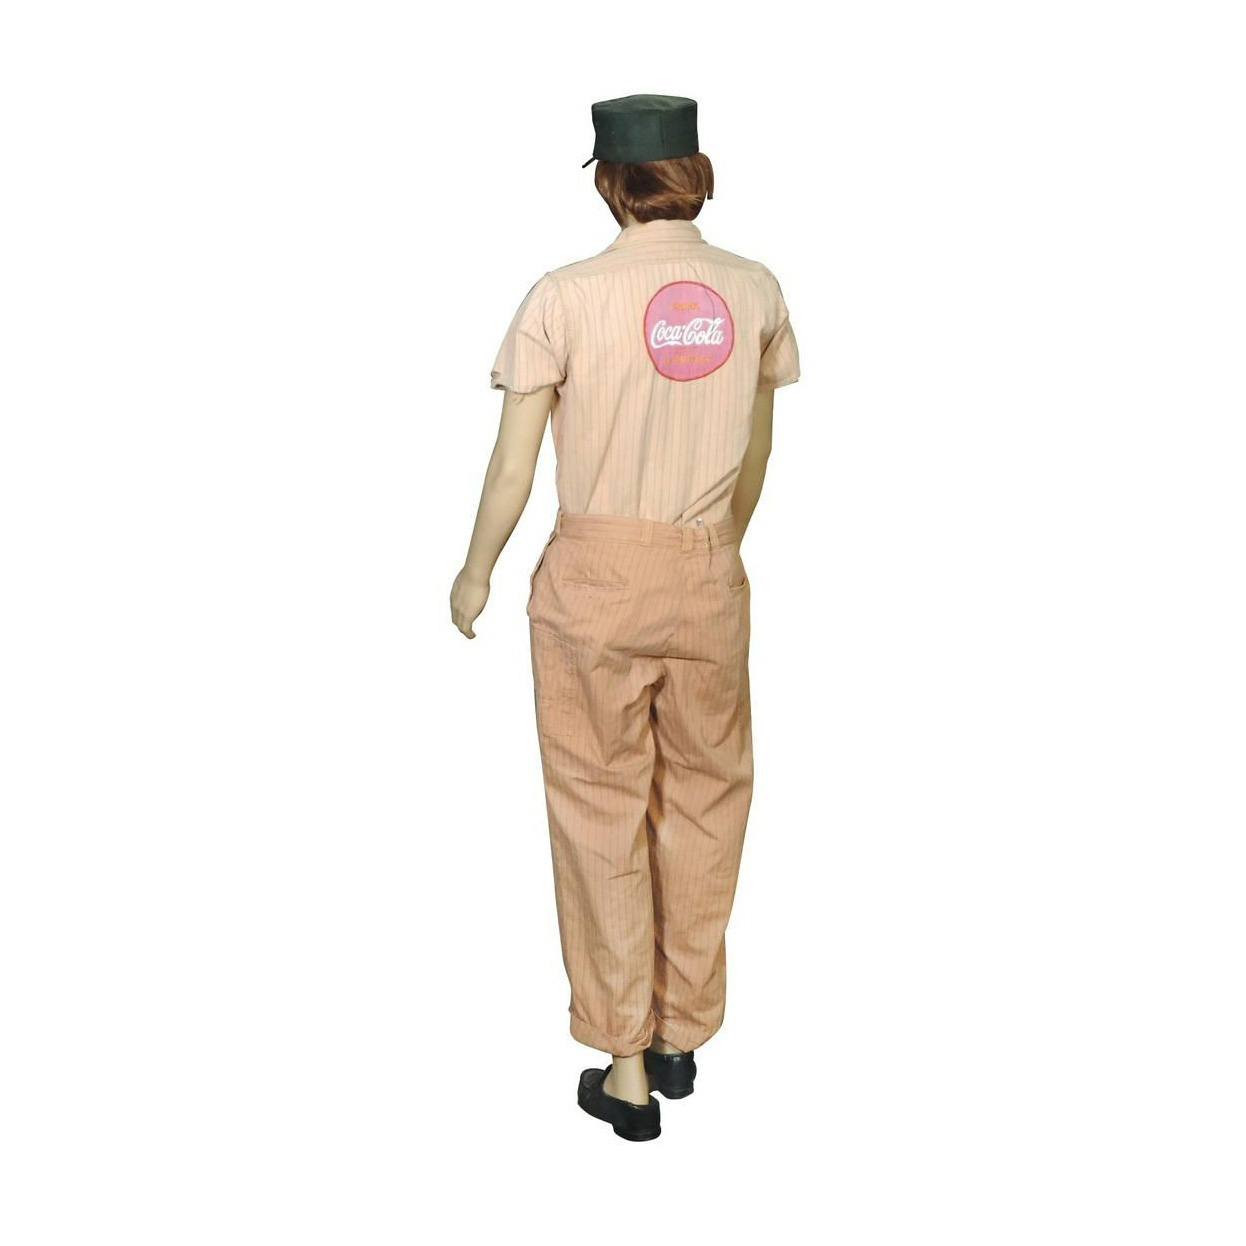 Coca-Cola Delivery Man's Uniform with Mannequin - Image 2 of 2